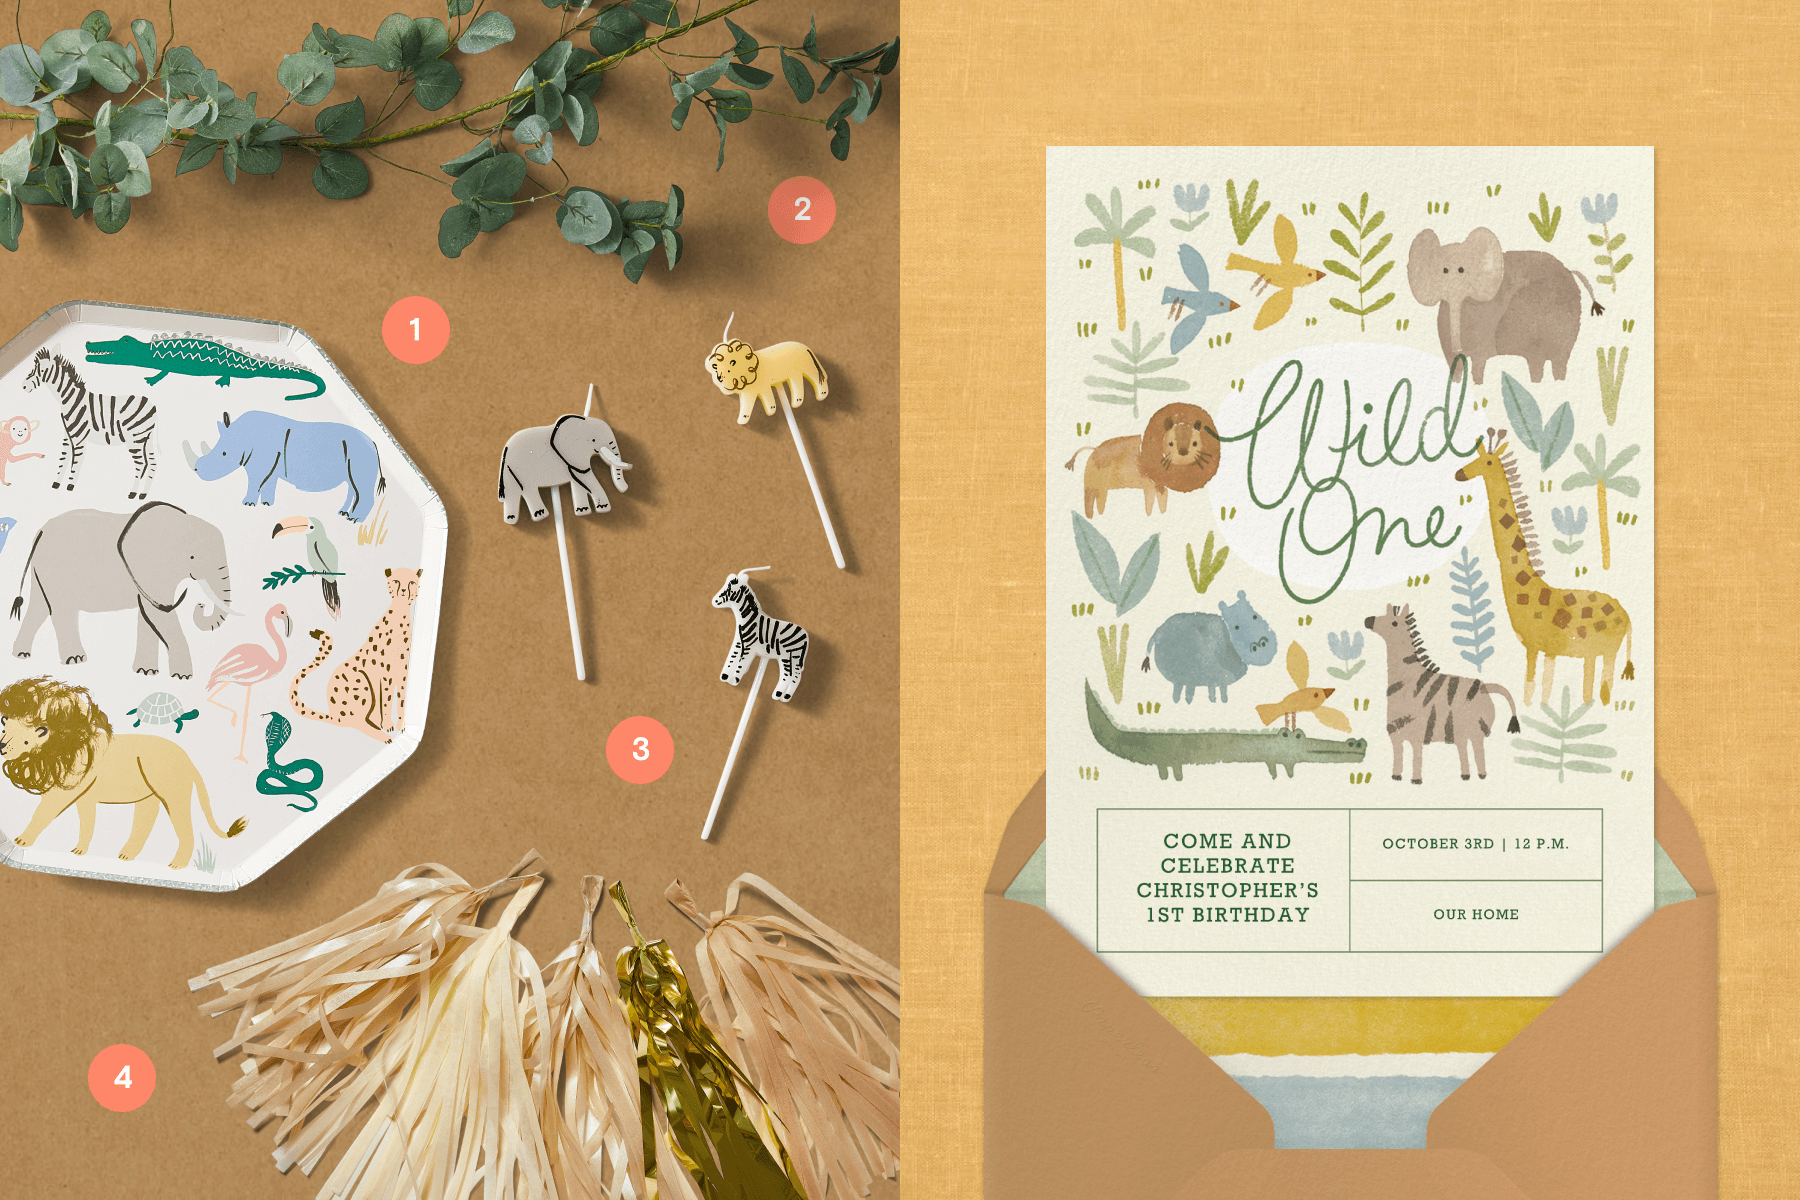 Left: Supplies for a safari-themed party, including a paper plate with animal illustrations, animal candles, a leafy garland, and shiny pom pom tassels. Right: An invitation for a 1st birthday reads “Wild One” with illustrations of African safari animals.